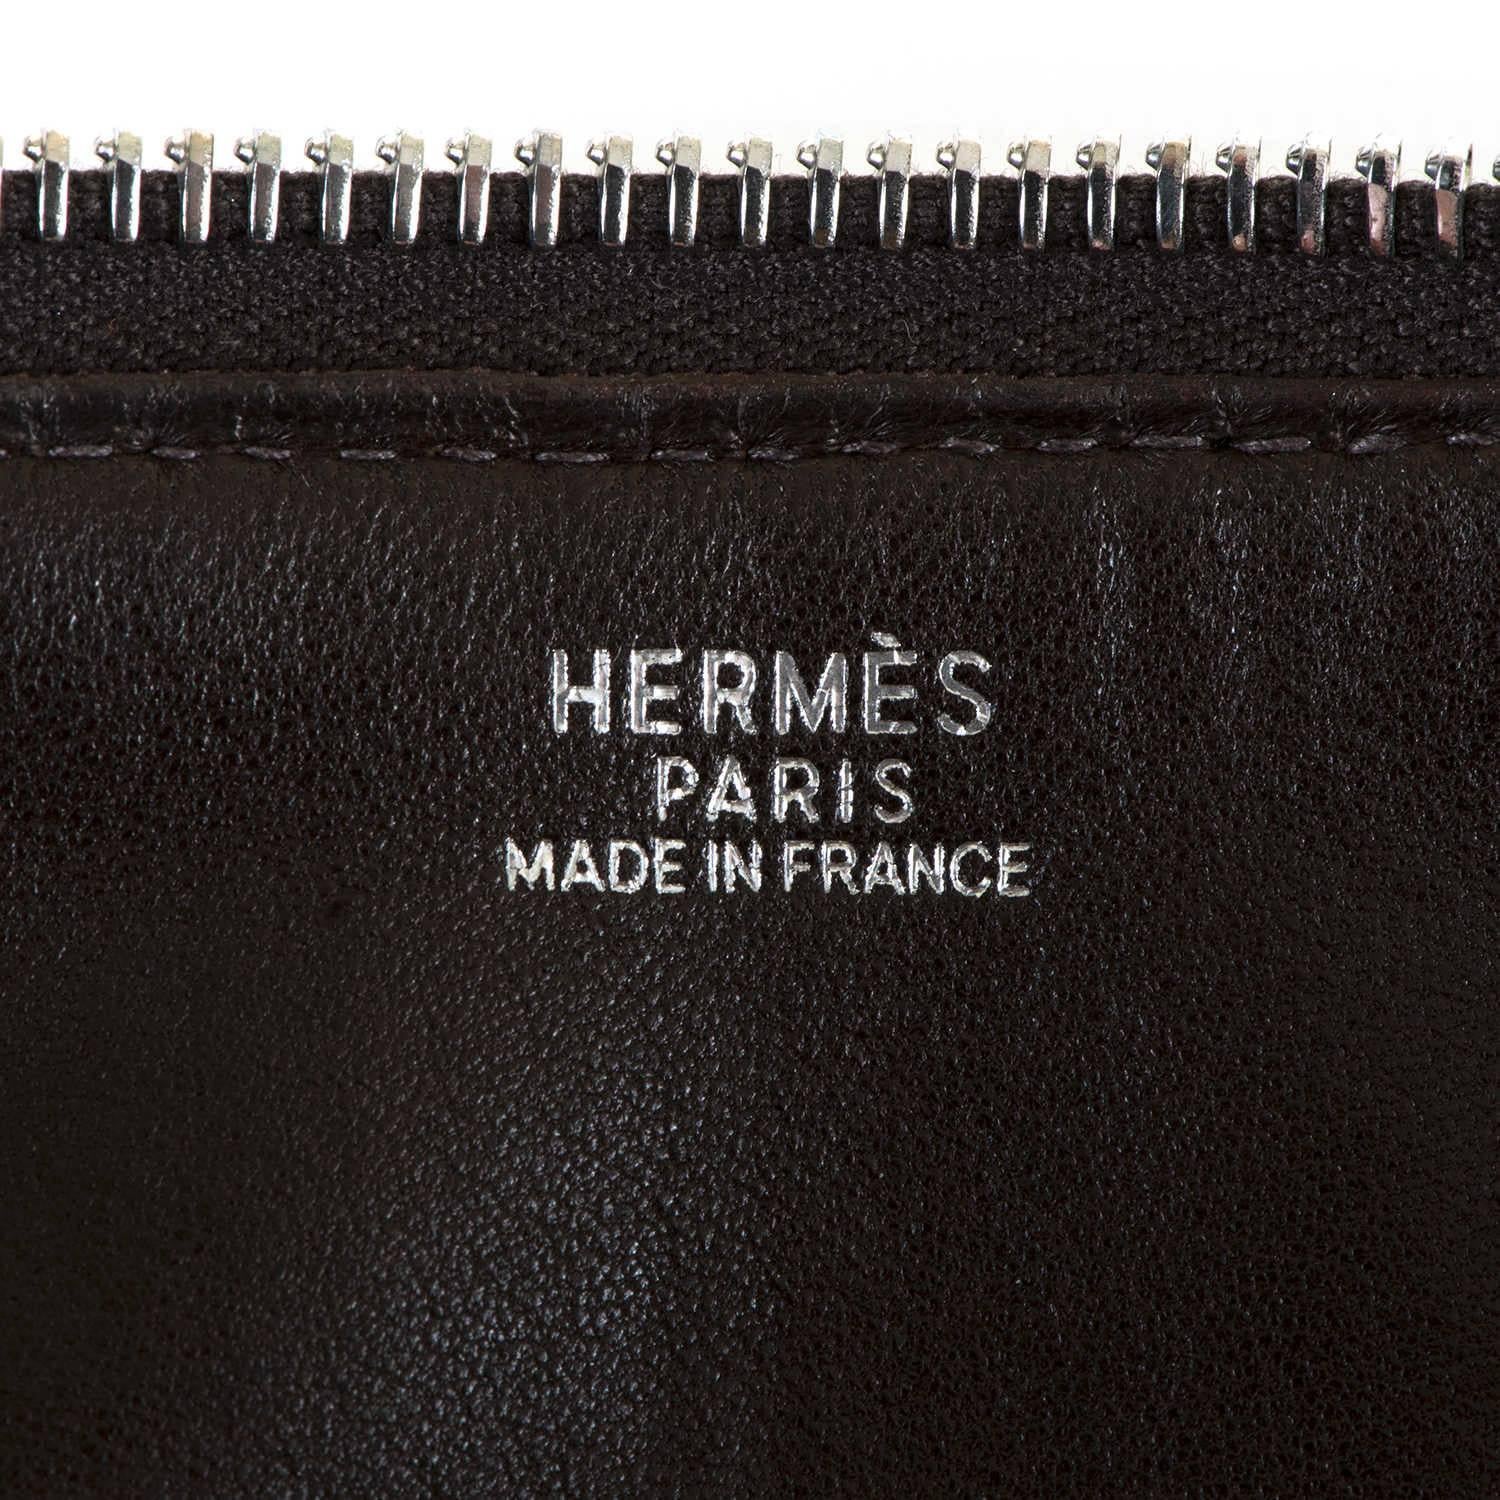 SO SO USEFUL ! A very Chic Hermes 'Trousse' for all your essential accessories. In 'As-New' condition, inside & out, this very rare find will sit perfectly inside your Hermes 35 cm Birkin or 32 cm Kelly Bag. A great Xmas present.